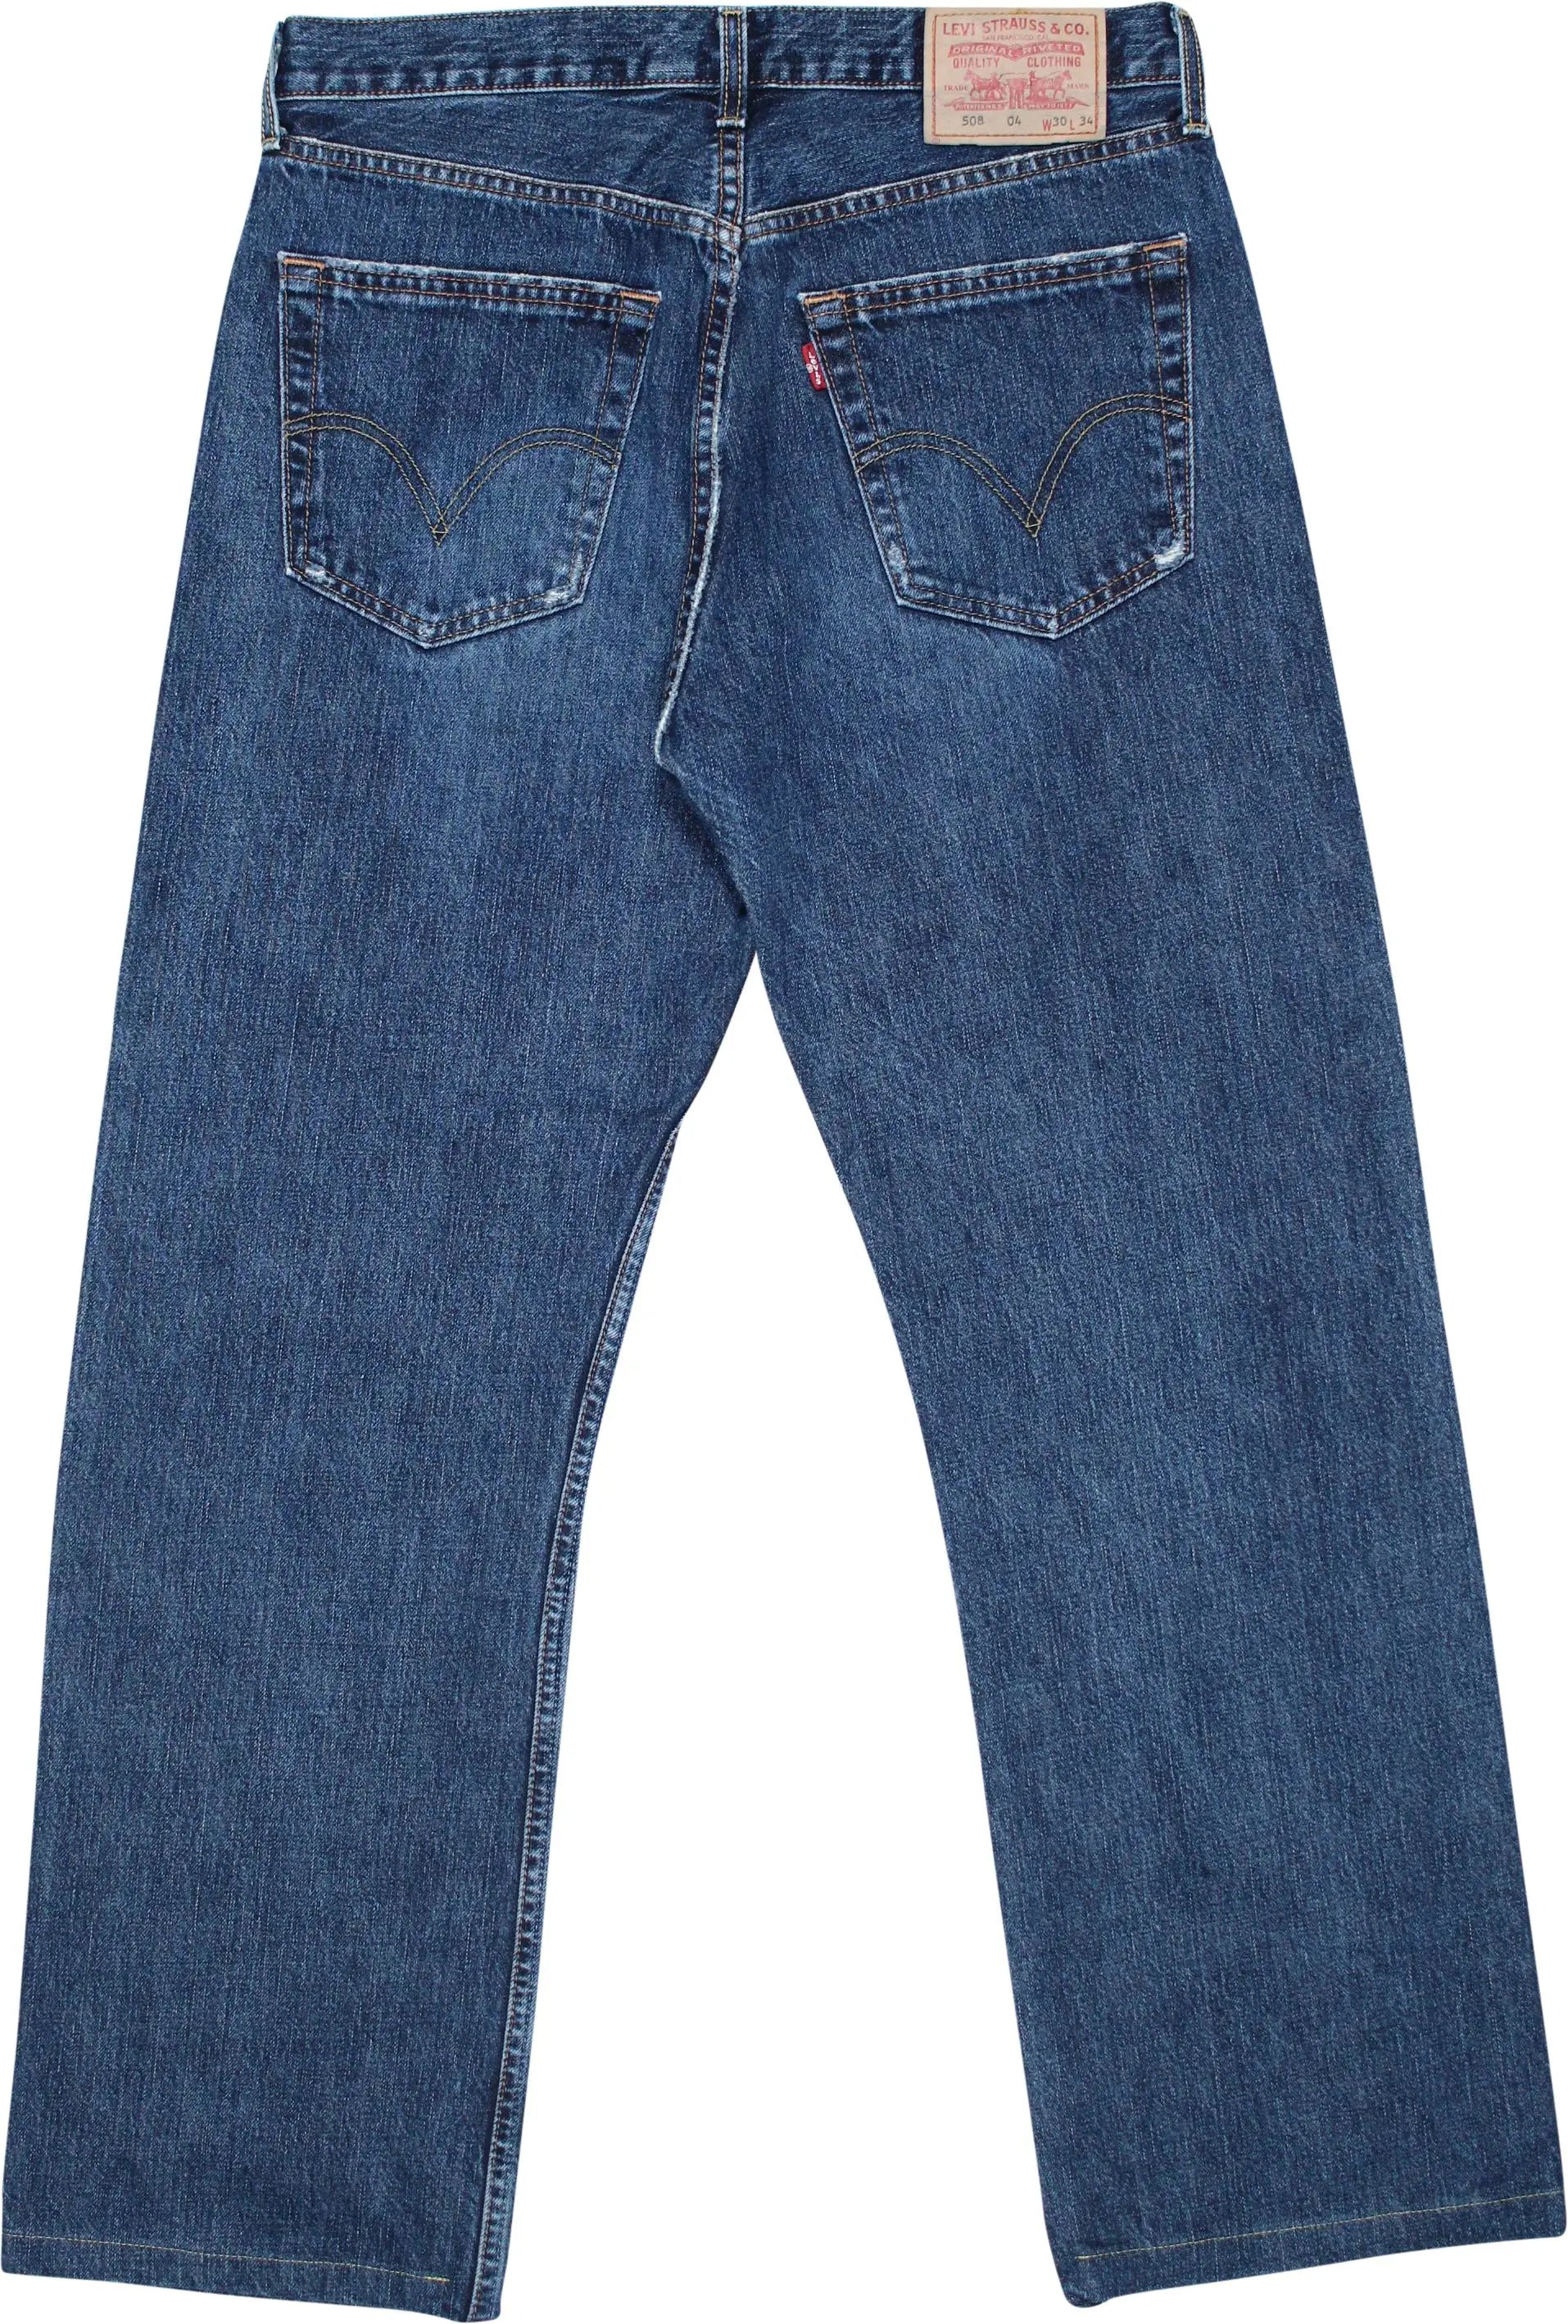 Levi's - 508 Jeans by Levi's- ThriftTale.com - Vintage and second handclothing